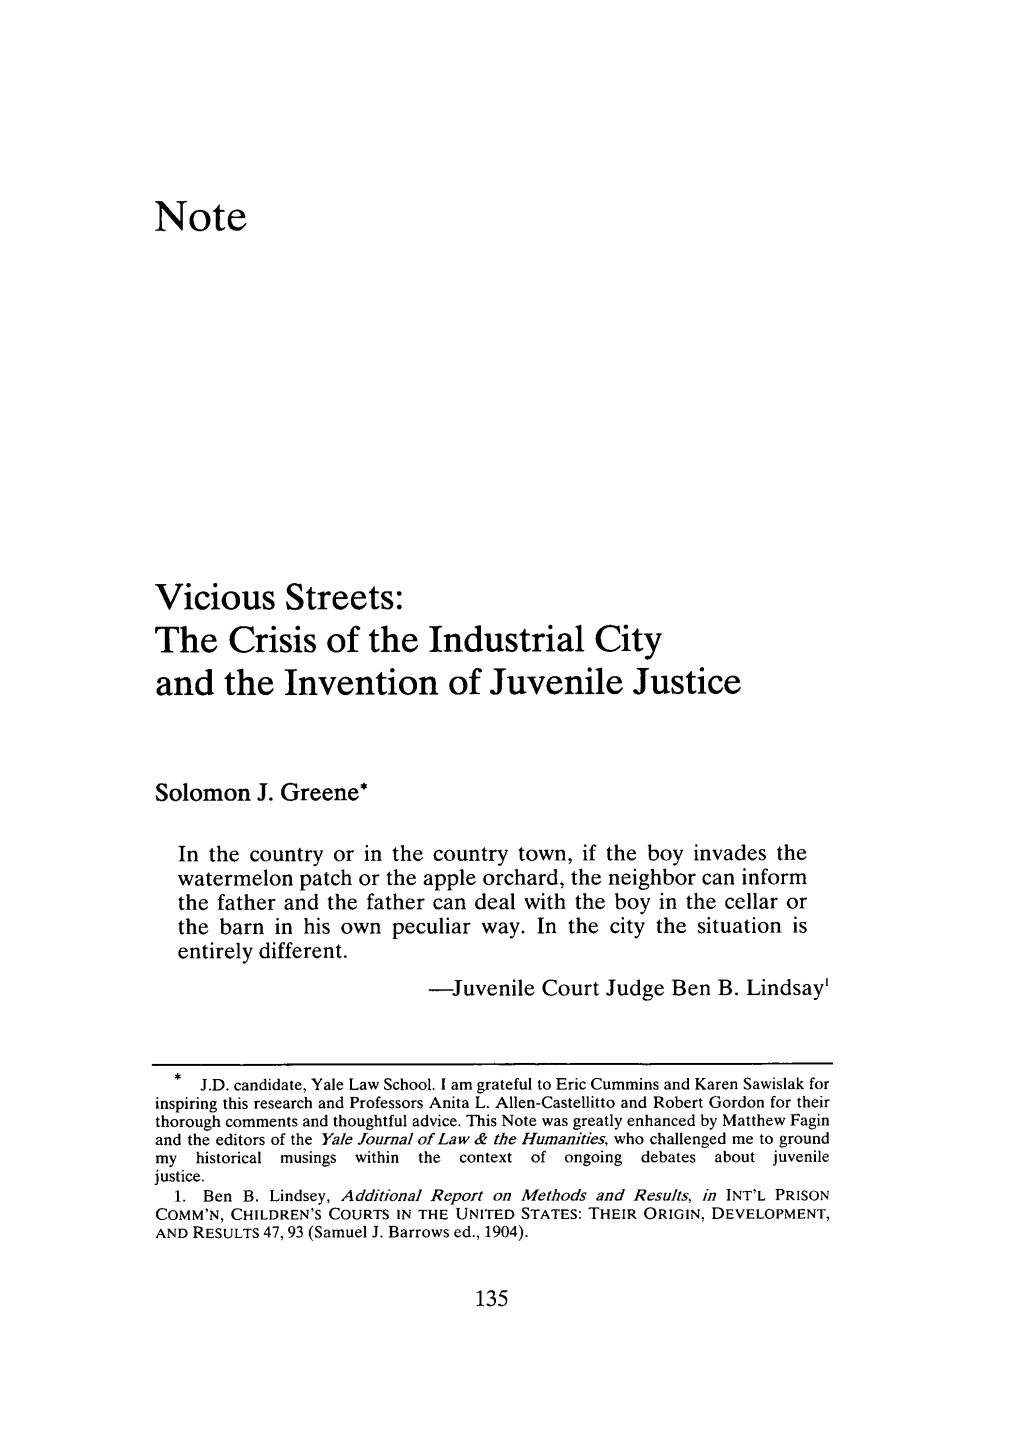 The Crisis of the Industrial City and the Invention of Juvenile Justice